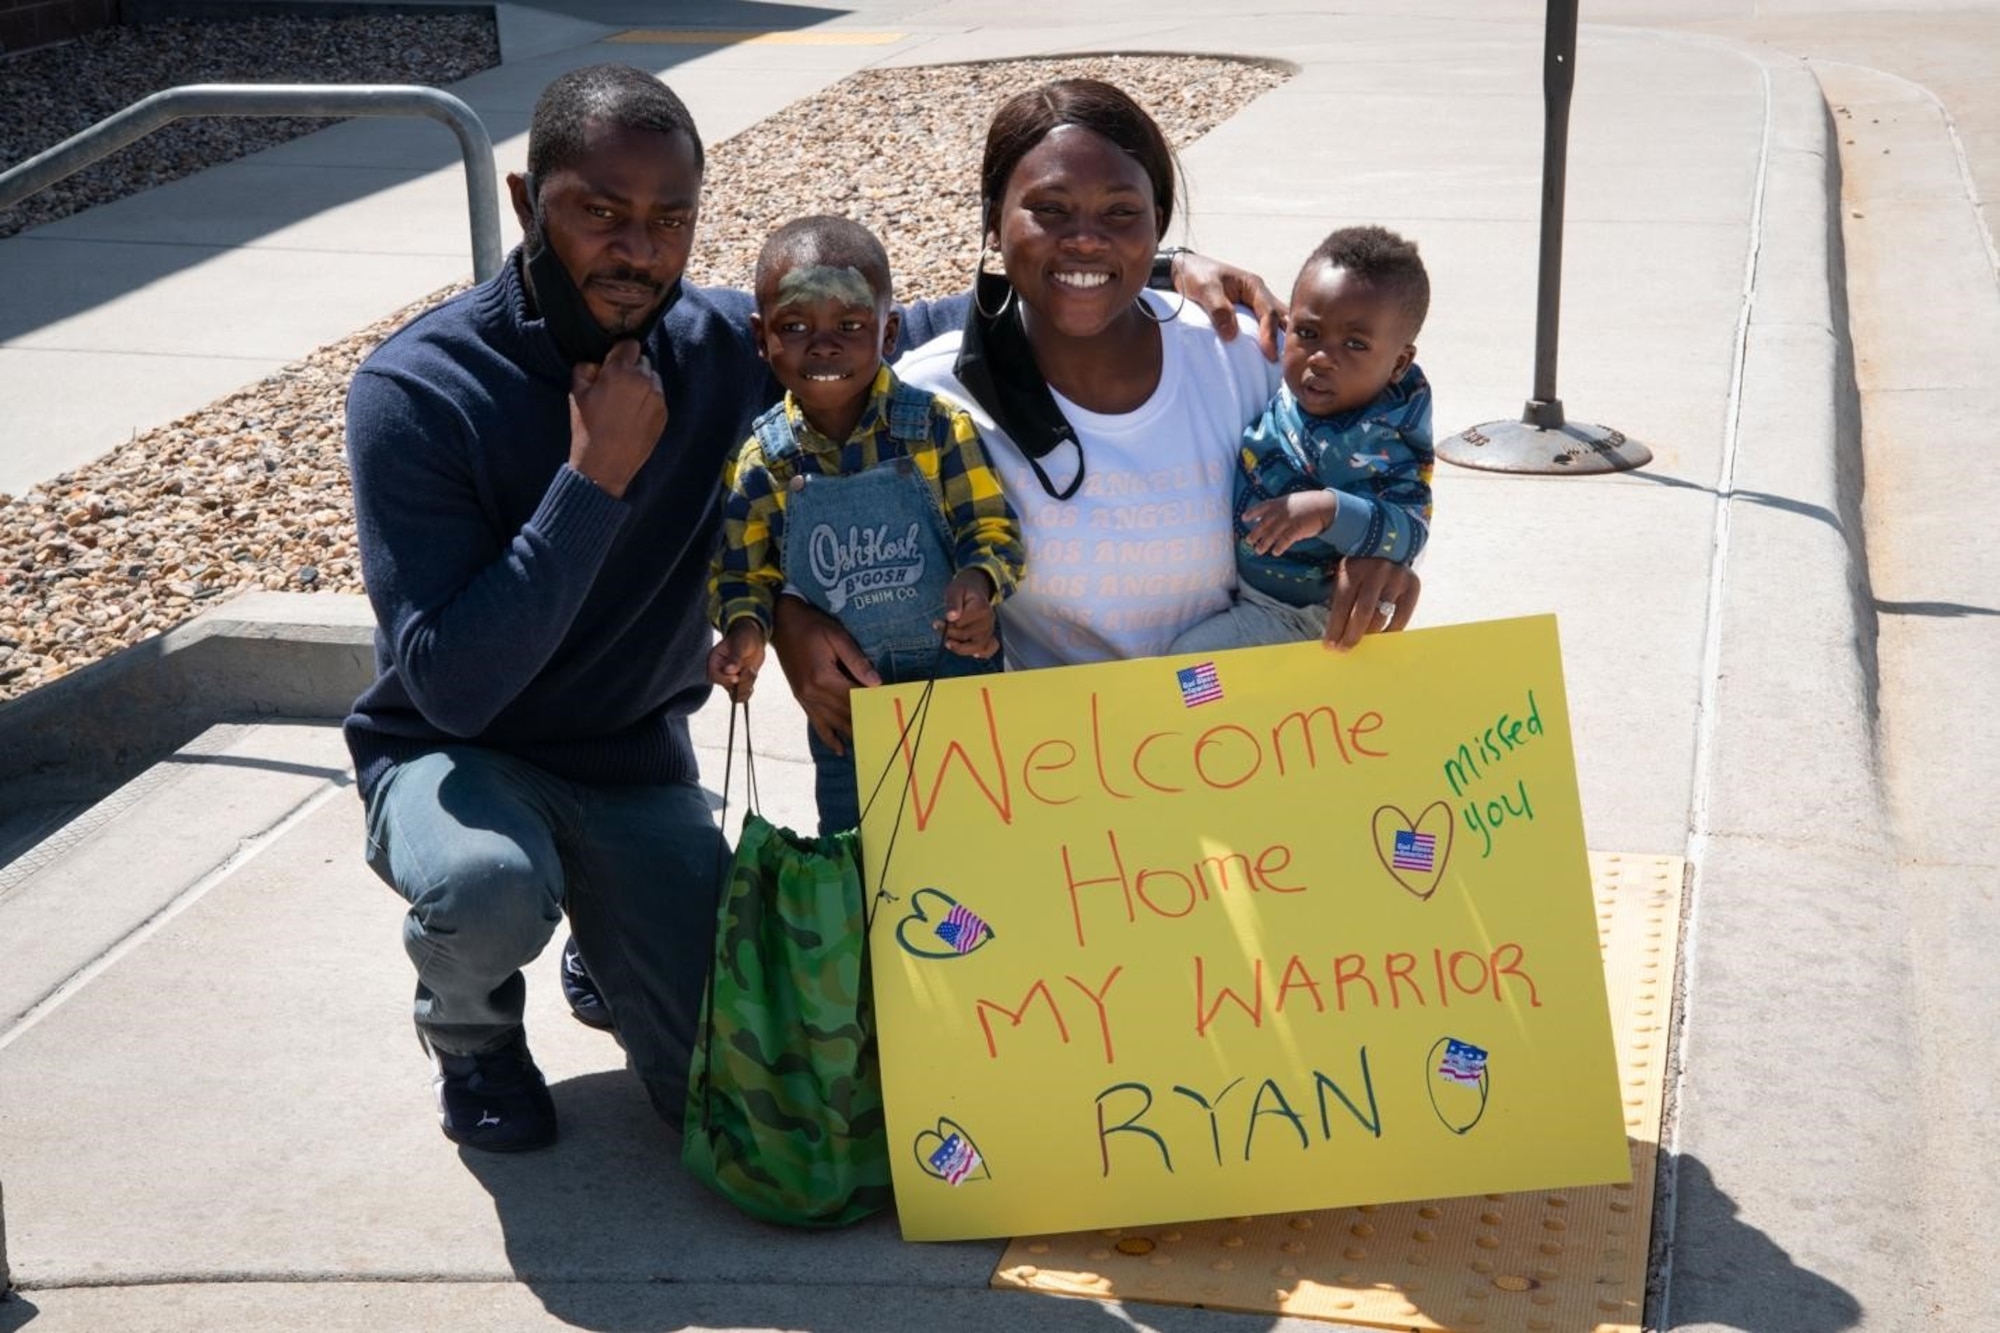 Staff Sgt. Bernice Asiedu, a 28th Comptroller Squadron financial analyst non-commissioned officer in charge, welcomes her family home from their mock deployment during an event on Ellsworth Air Force Base, S.D., April 17, 2021.